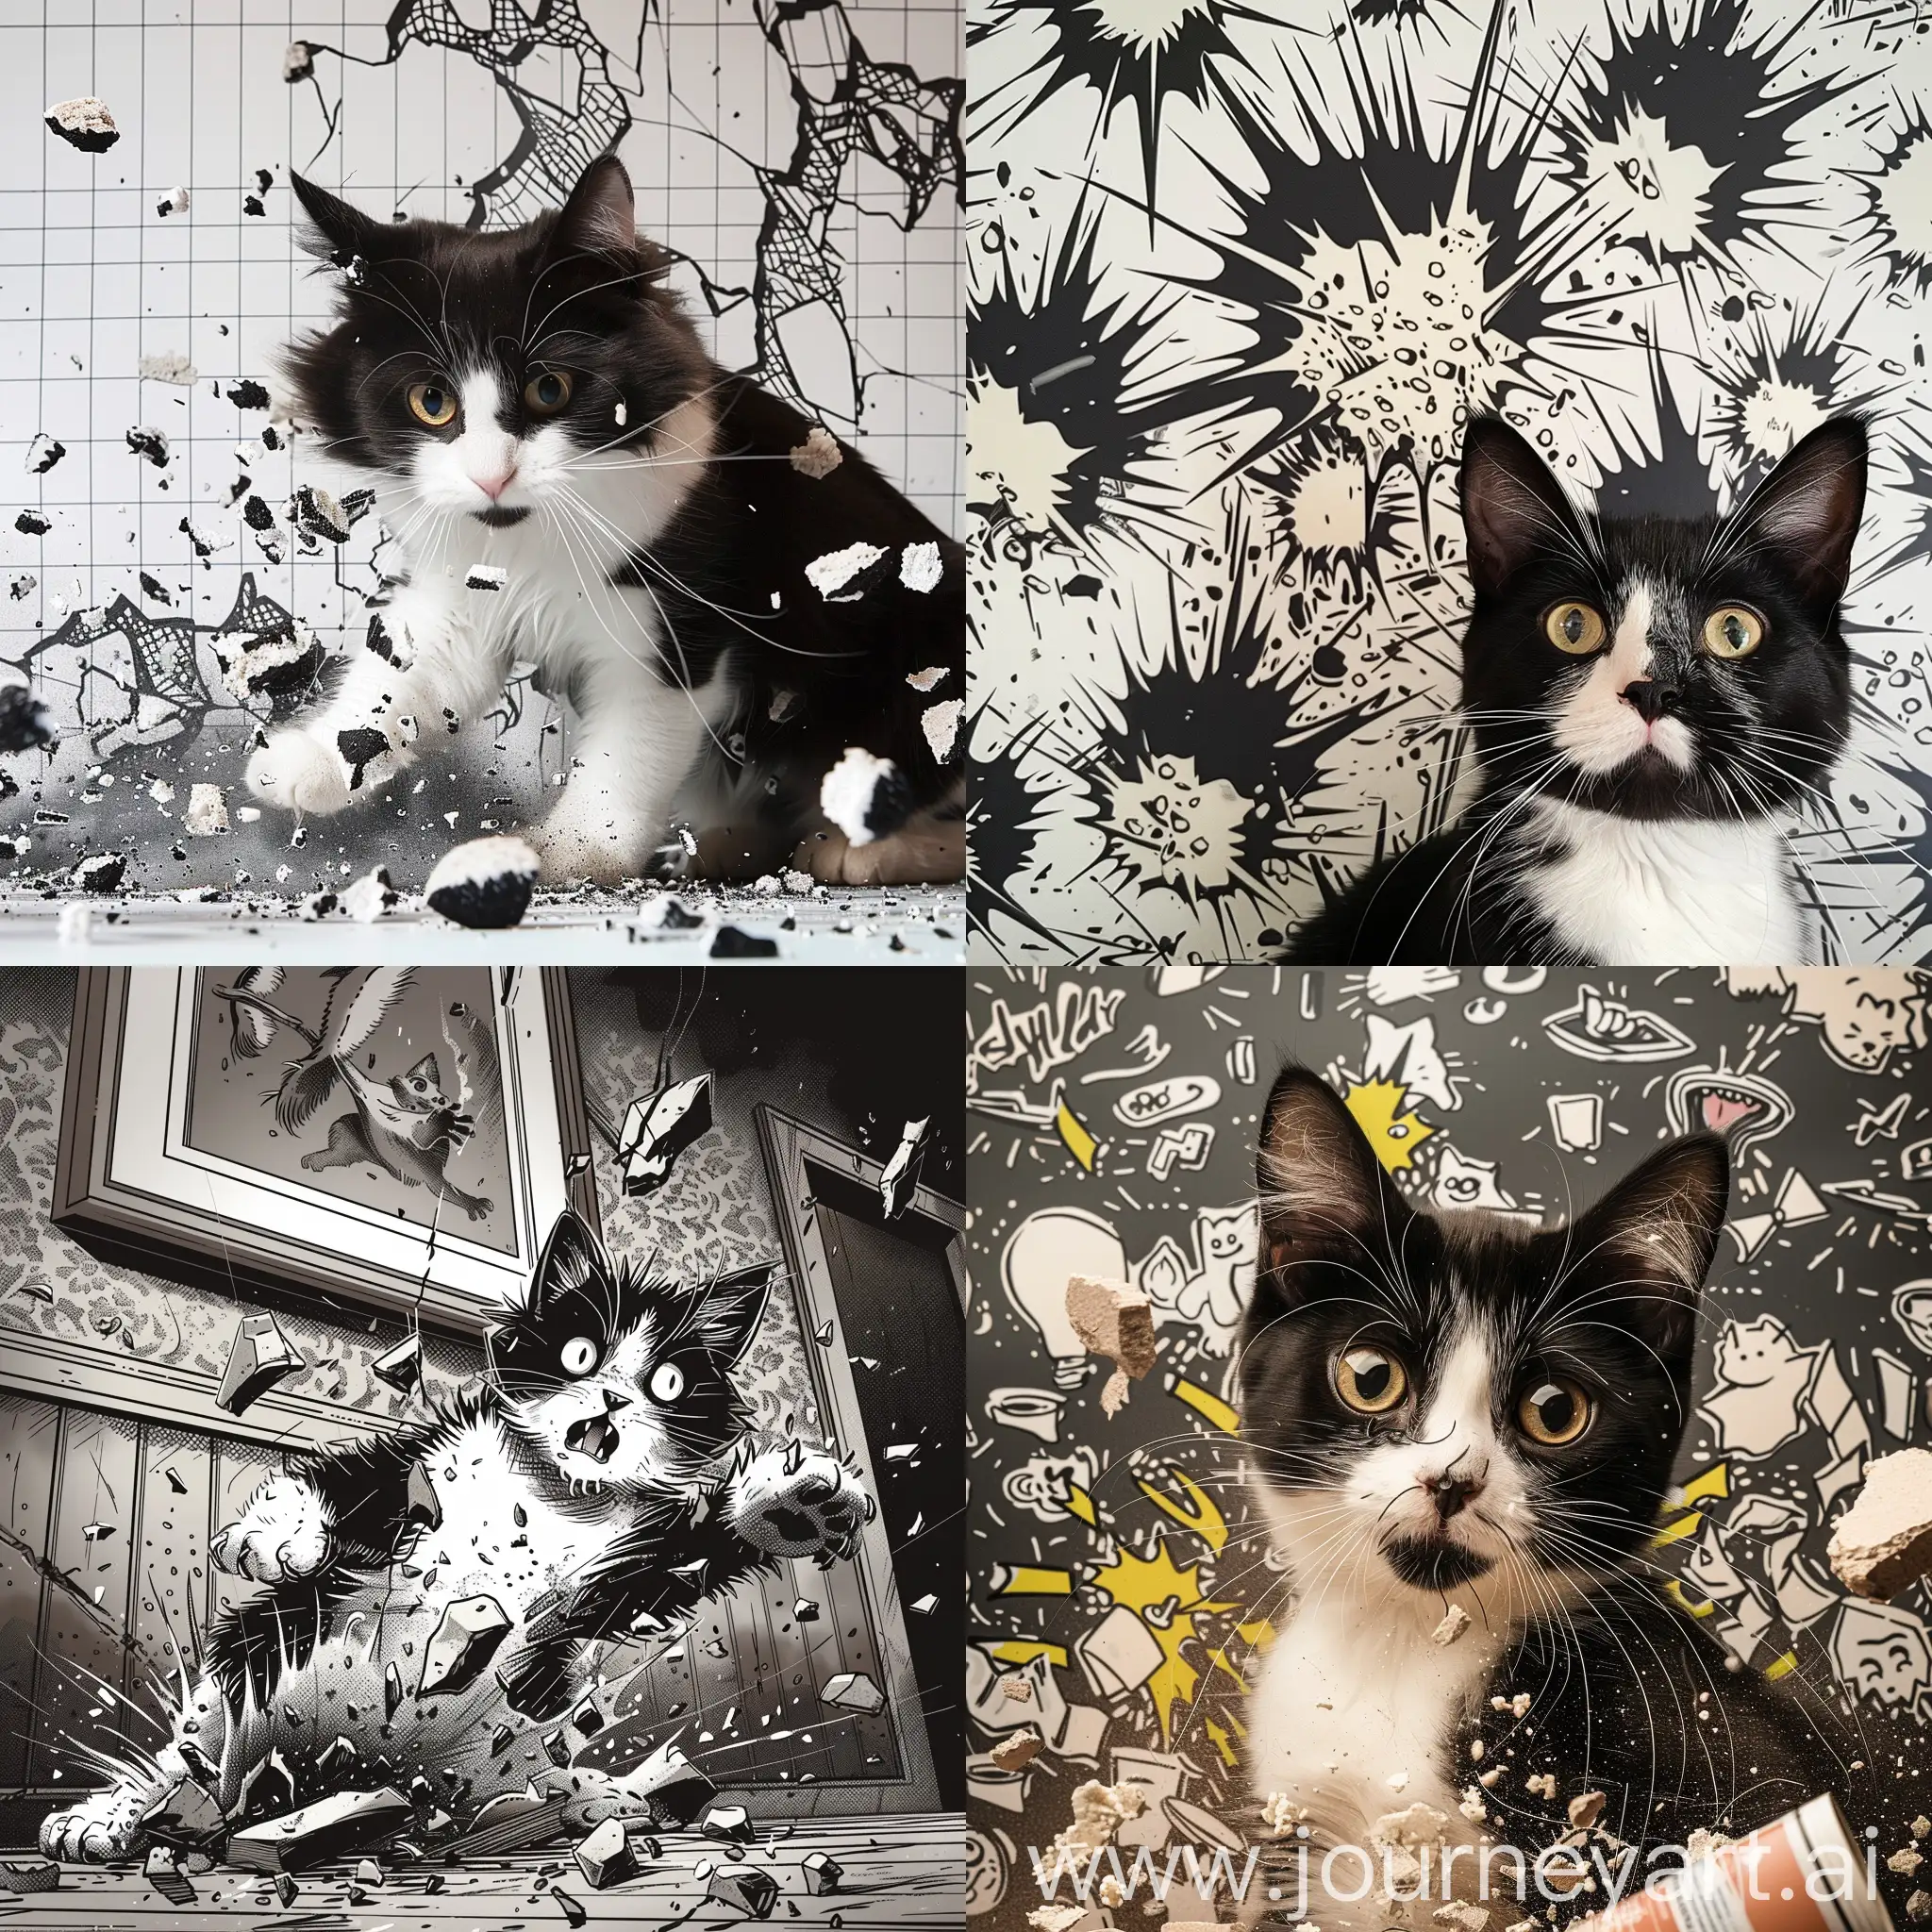 Playful-Monochrome-Cat-Creating-Chaos-with-Wallpaper